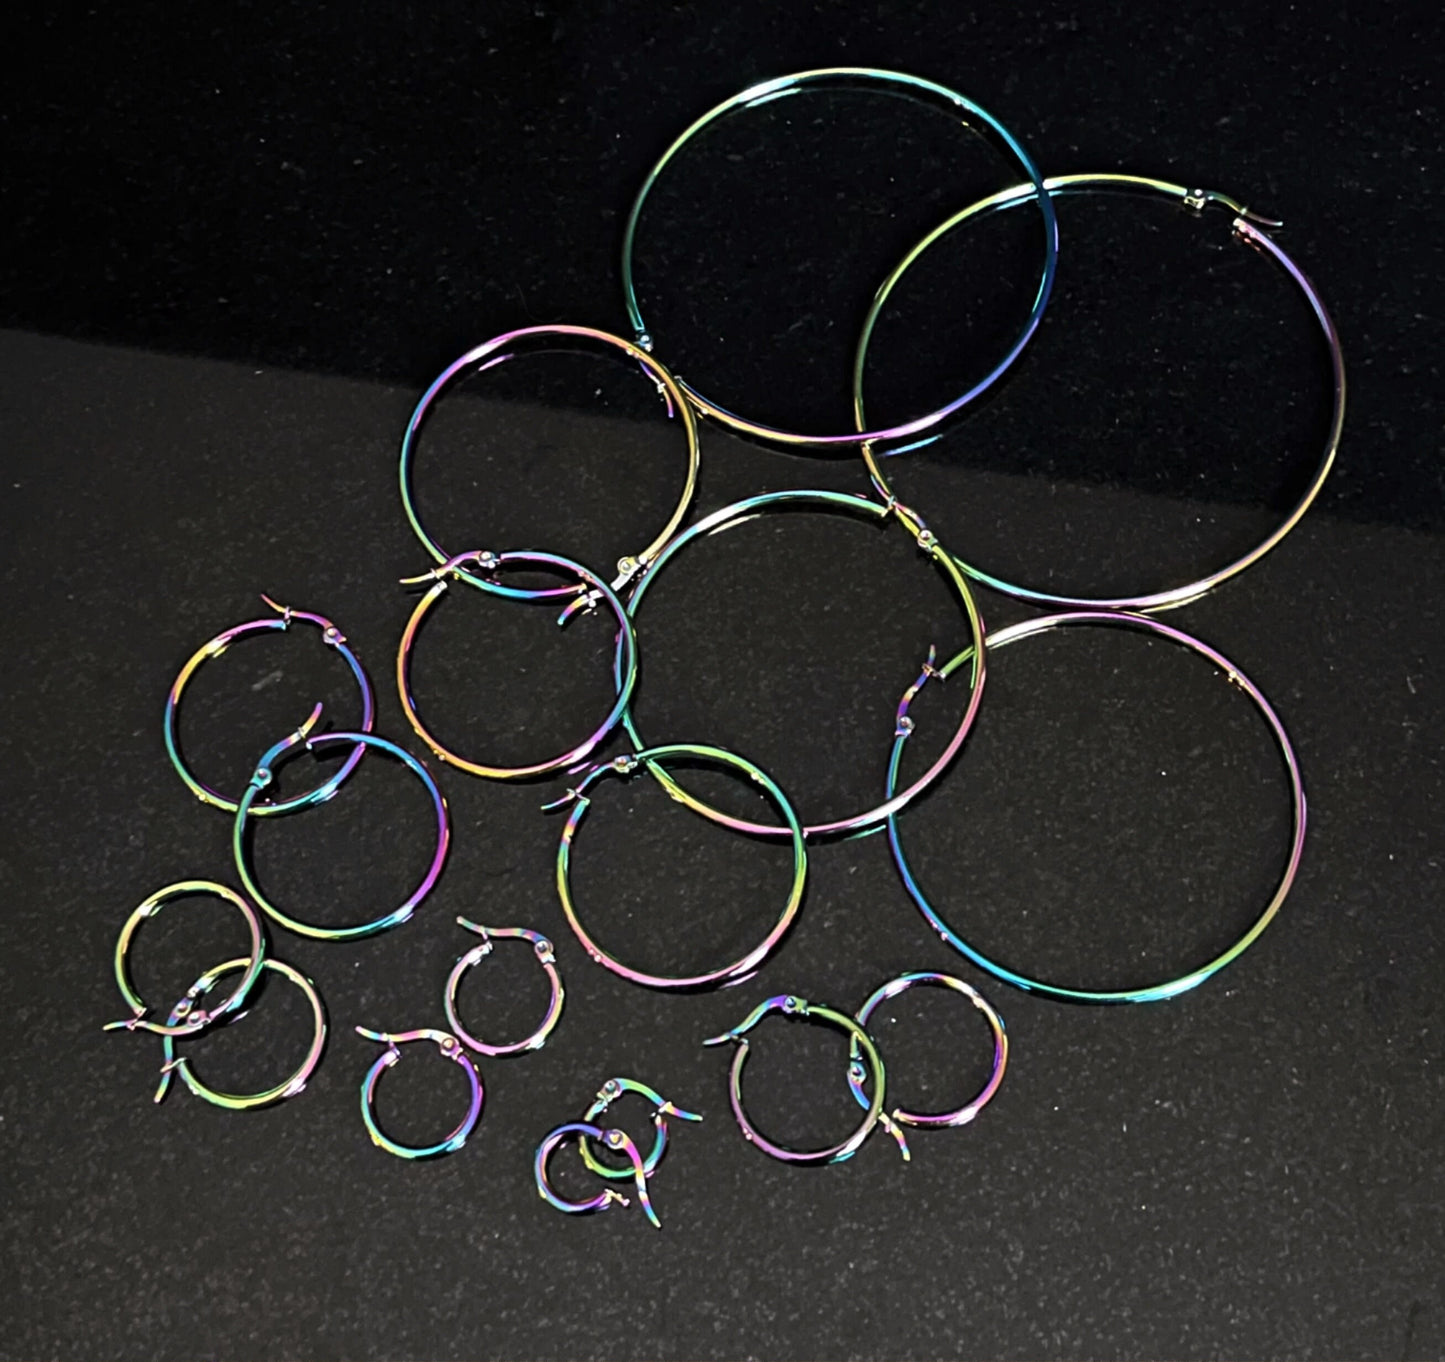 Pair of Stunningly Unique Rainbow Hoop Earrings - Ion Plated Stainless Steel Ring - 22g - 10mm thru 75mm Diameter Available!